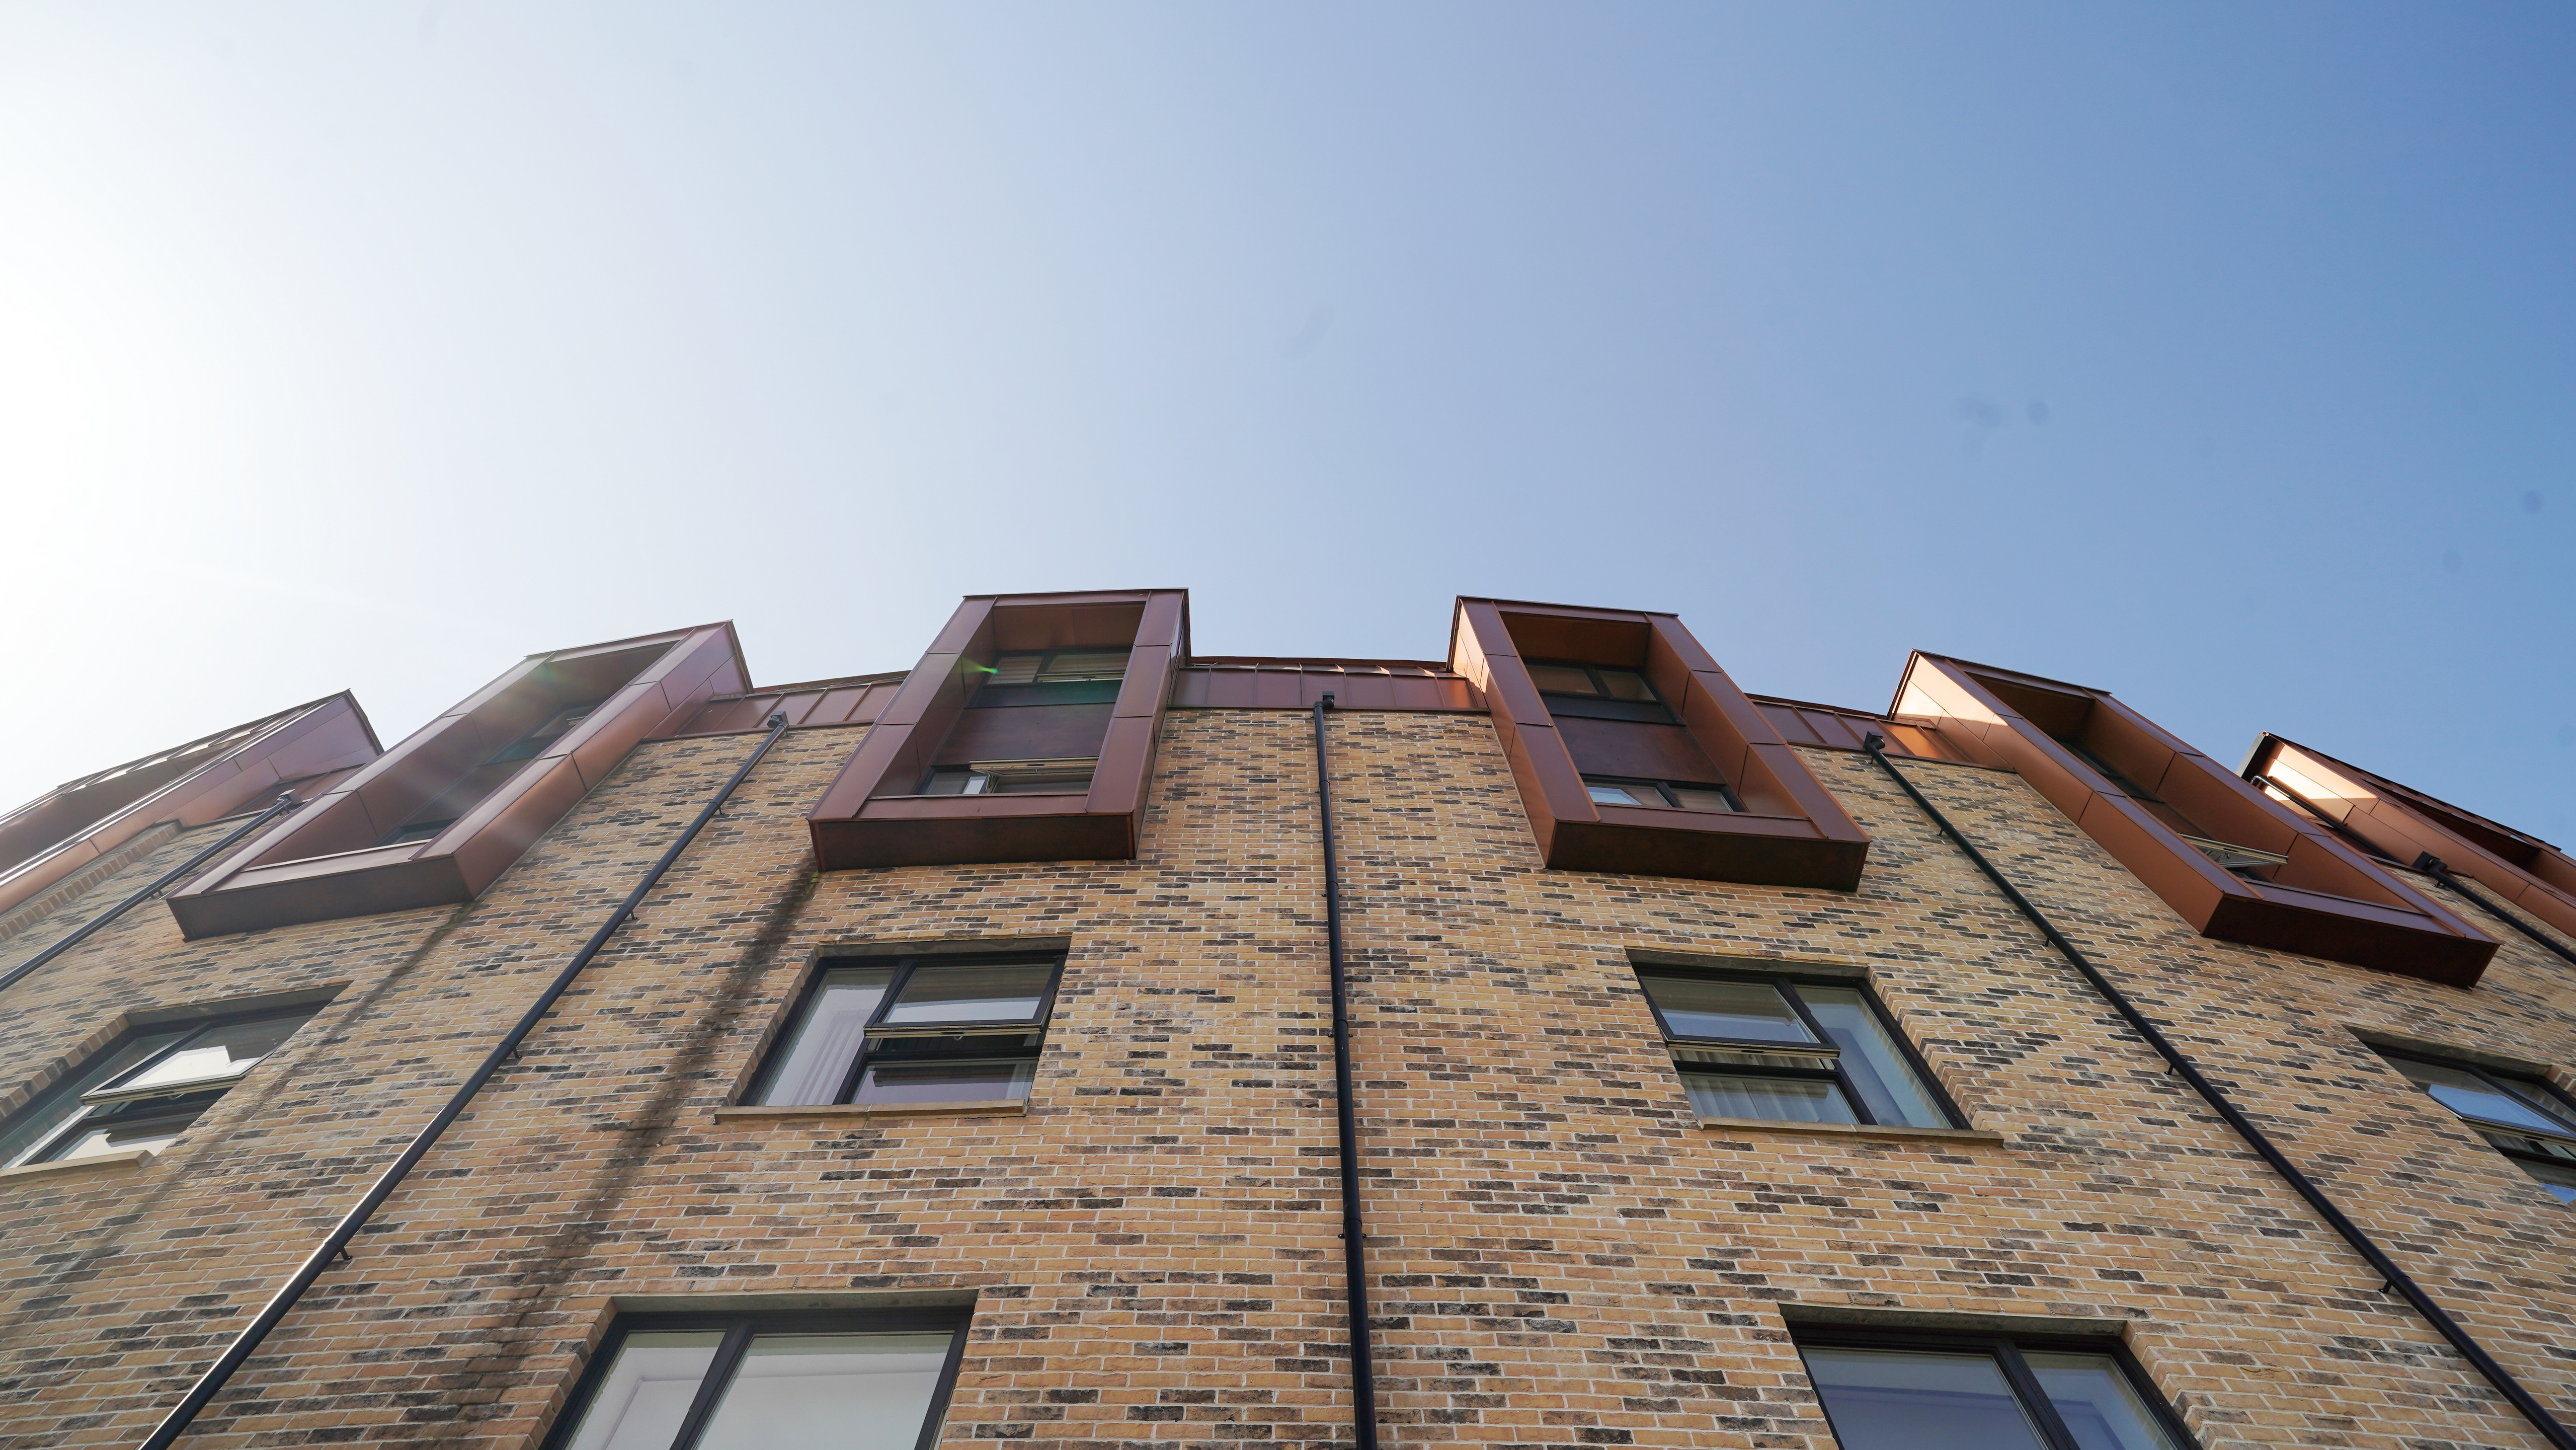 An upward view of the façade of a residential development on Nethan Street in Glasgow, which features the use of FALZONAL in New Copper, a durable and robust PREFA aluminium product. The vertical alignment of the windows, framed with the copper-coloured aluminium, breaks up the horizontal articulation of the brick wall and gives the building a dynamic and modern look. The quality and colouring of the FALZONAL blends seamlessly into the urban architecture while offering a durable and aesthetic solution for modern residential complexes. Black downpipes for roof drainage have been placed between the windows, emphasising the curvature of the building from this perspective.